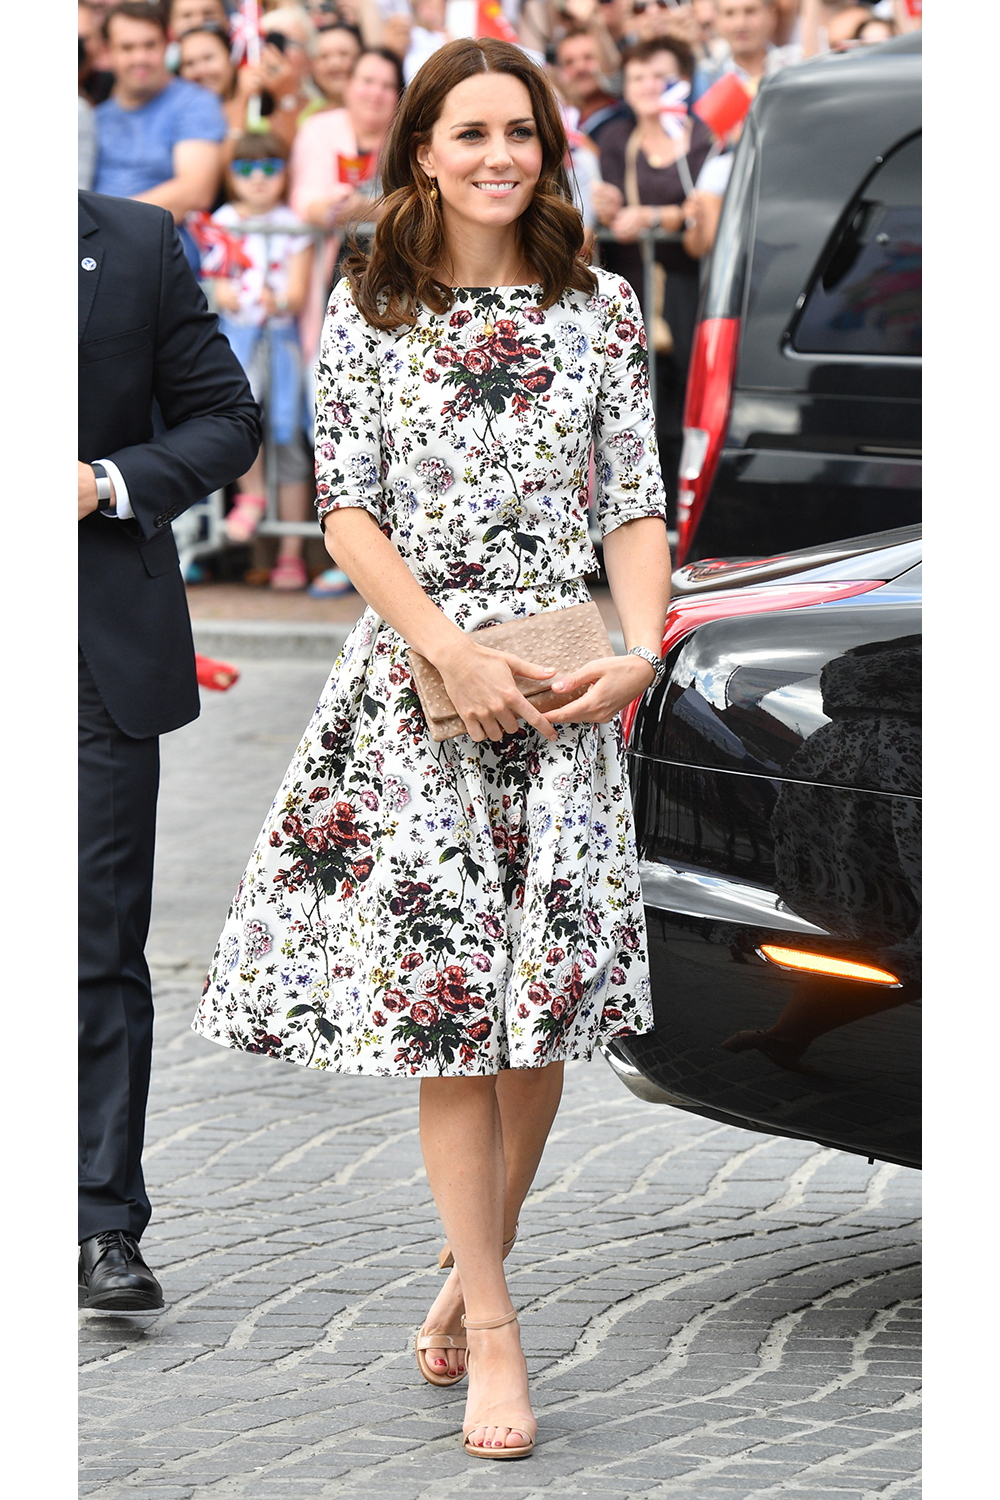 During their official visit to Germany and Poland, the Duchess of Cambridge, Catherine is seen in Poland floating in a gorgeous floral dress.